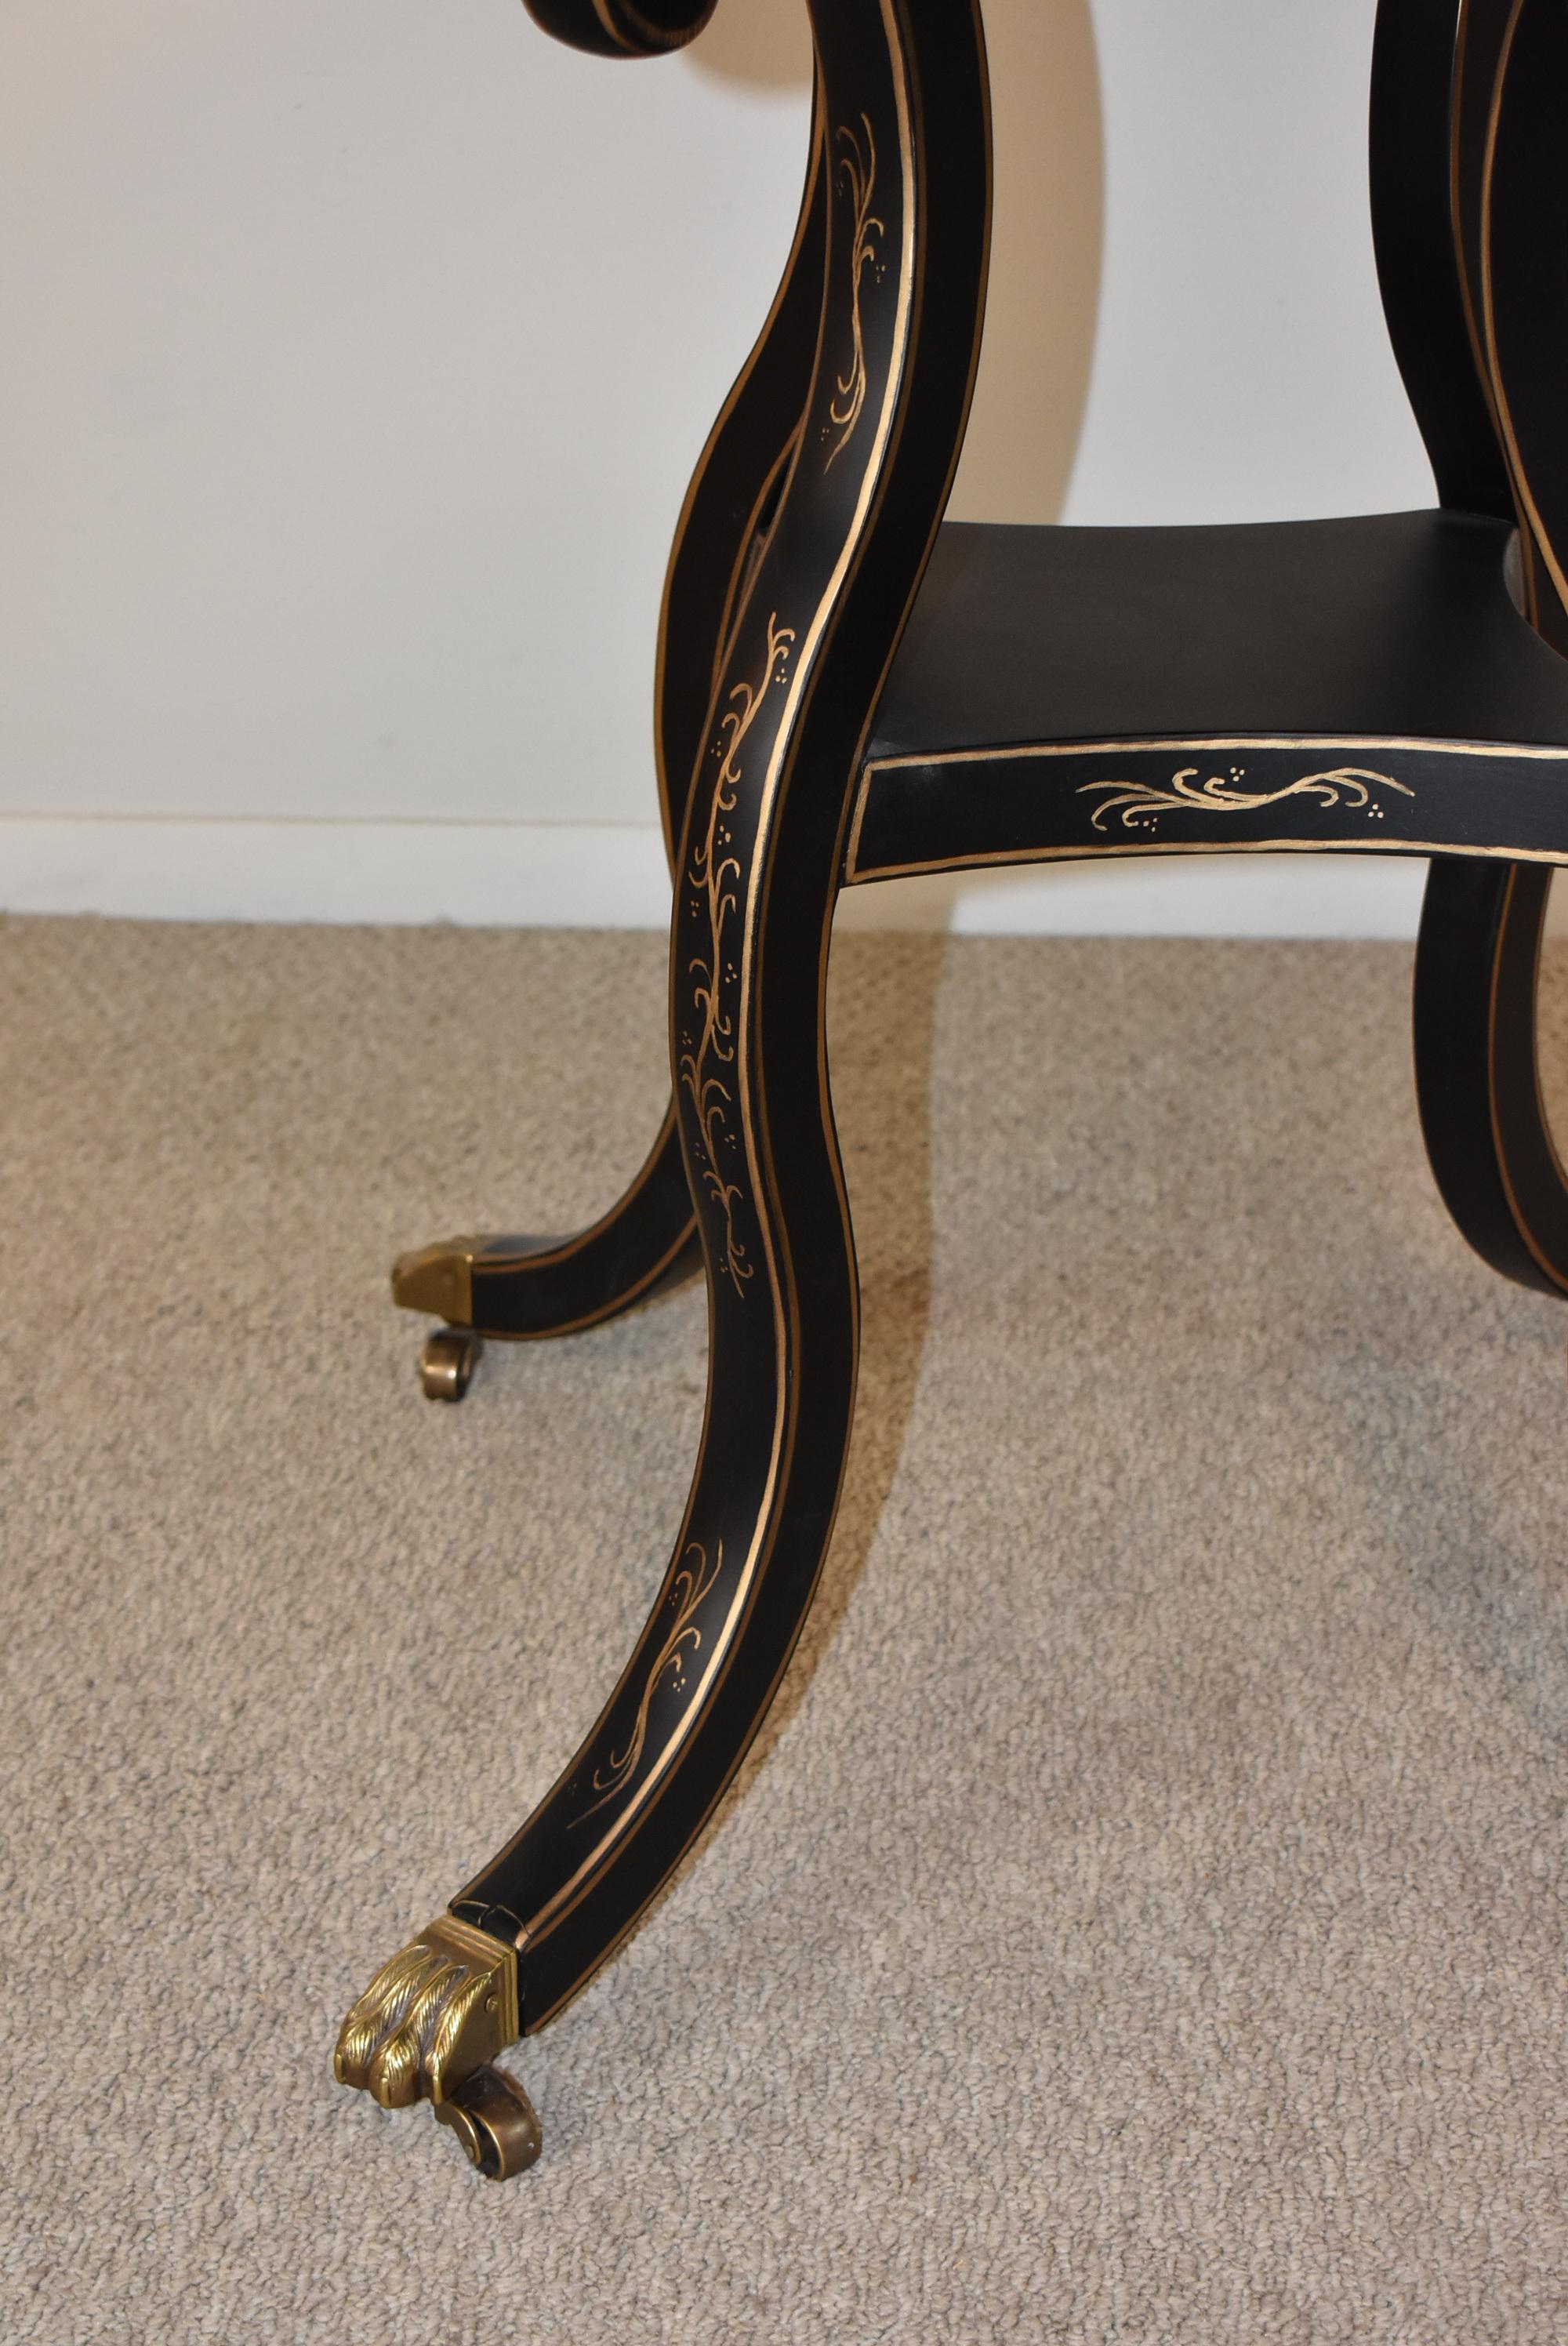 Empire style eglomise mirrored round center table. Black finish painted leaf details and trim in gold. Distressed mirror top.